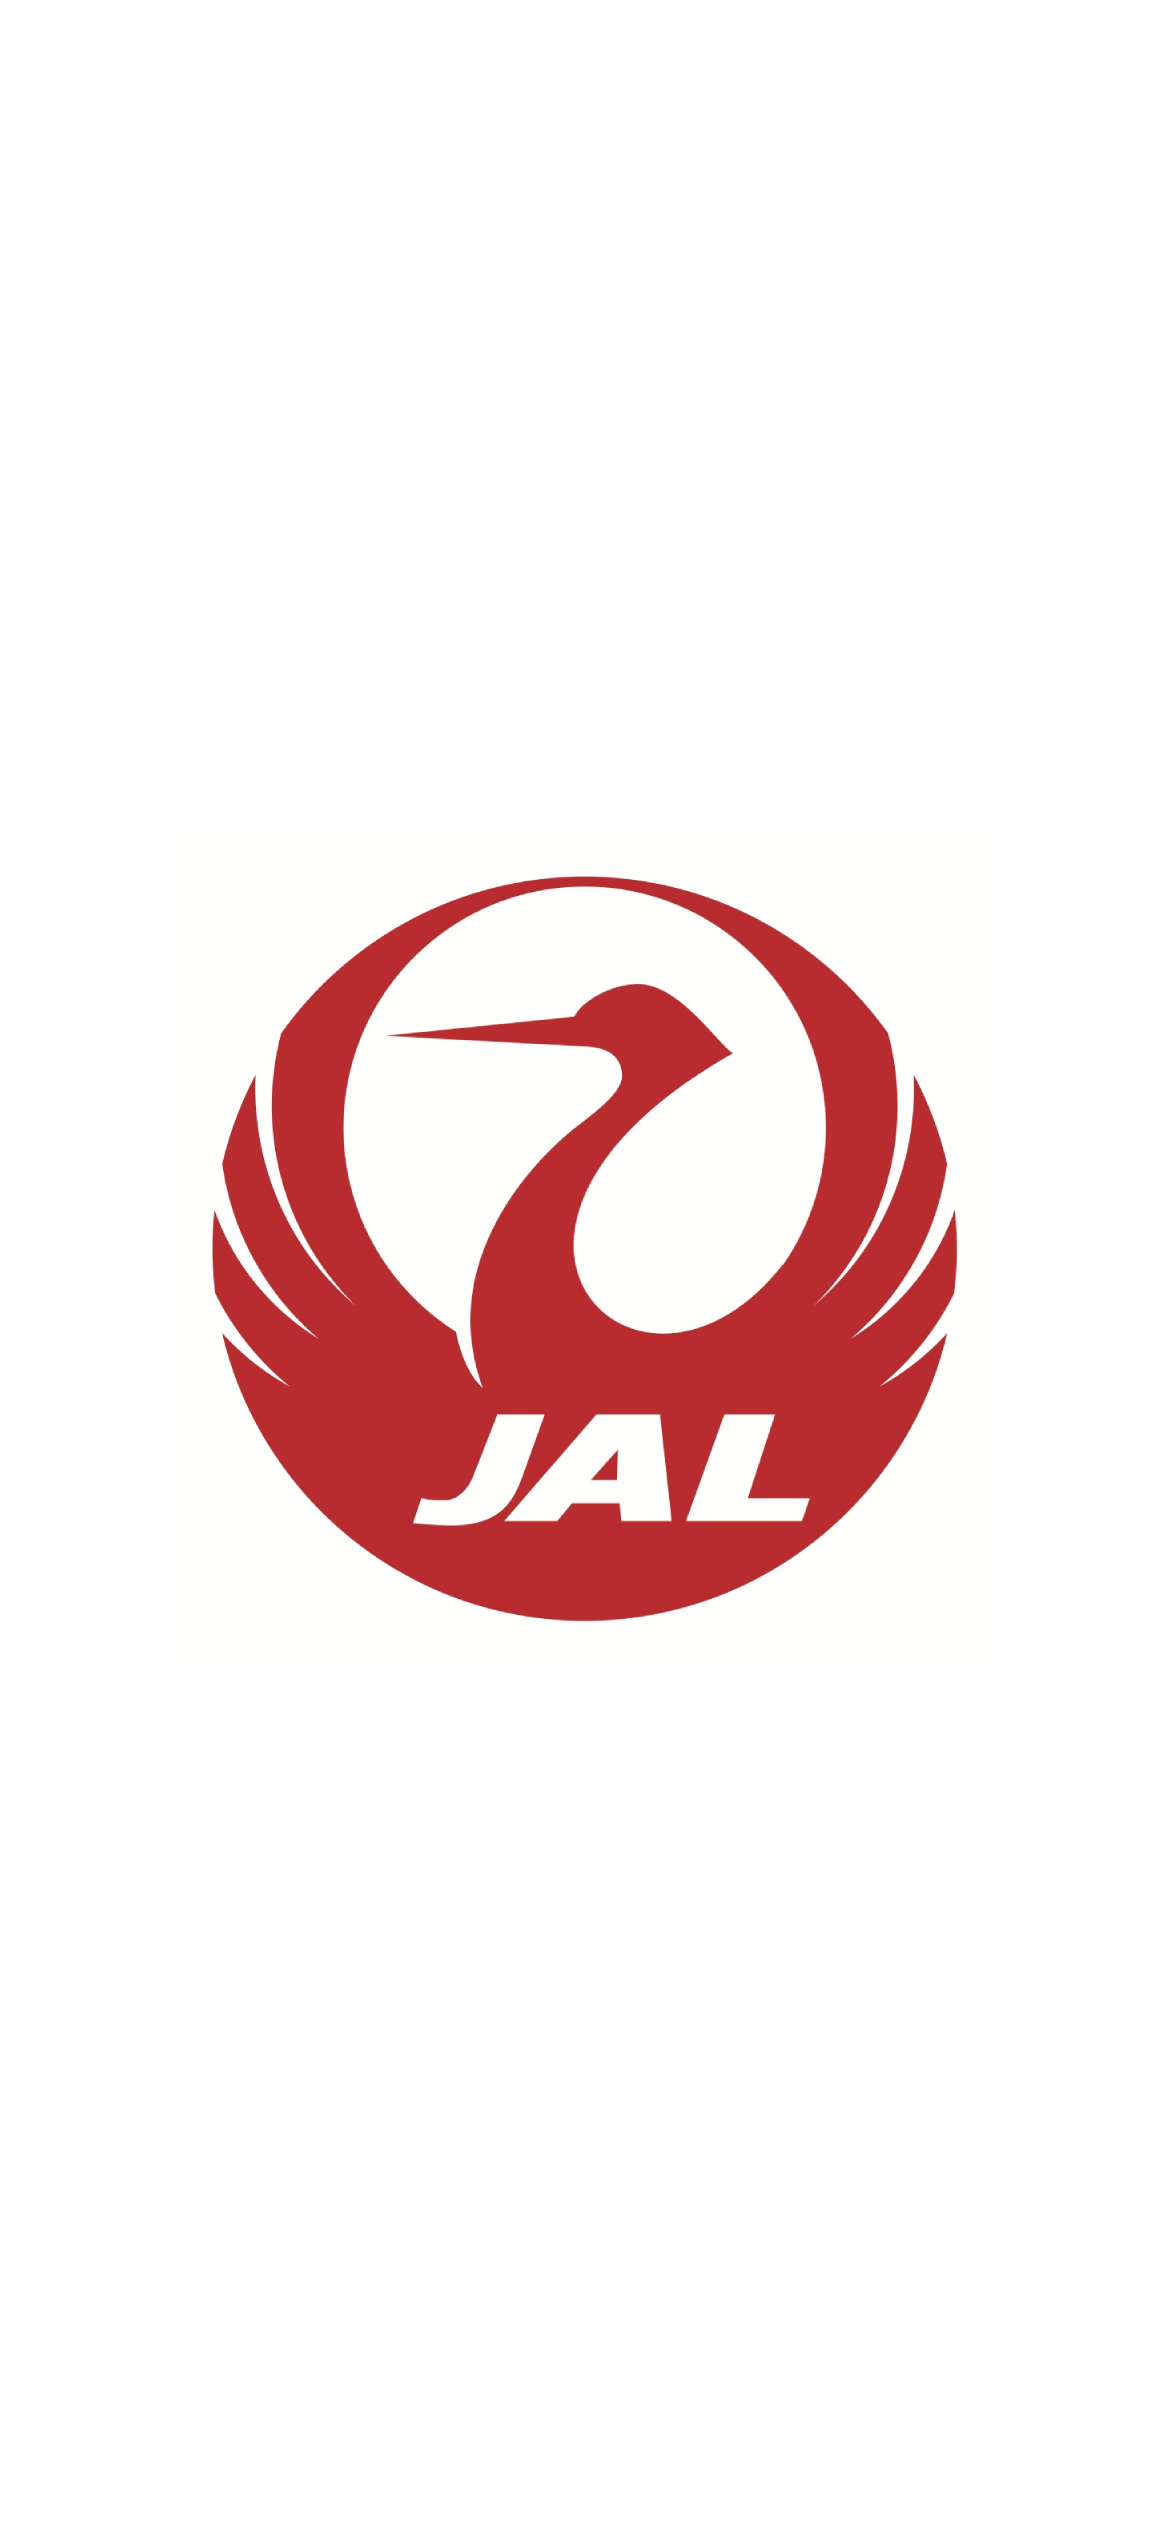 Jal Japan Airlines 日本航空 Iphone 13 Pro 壁紙 待ち受け スマラン